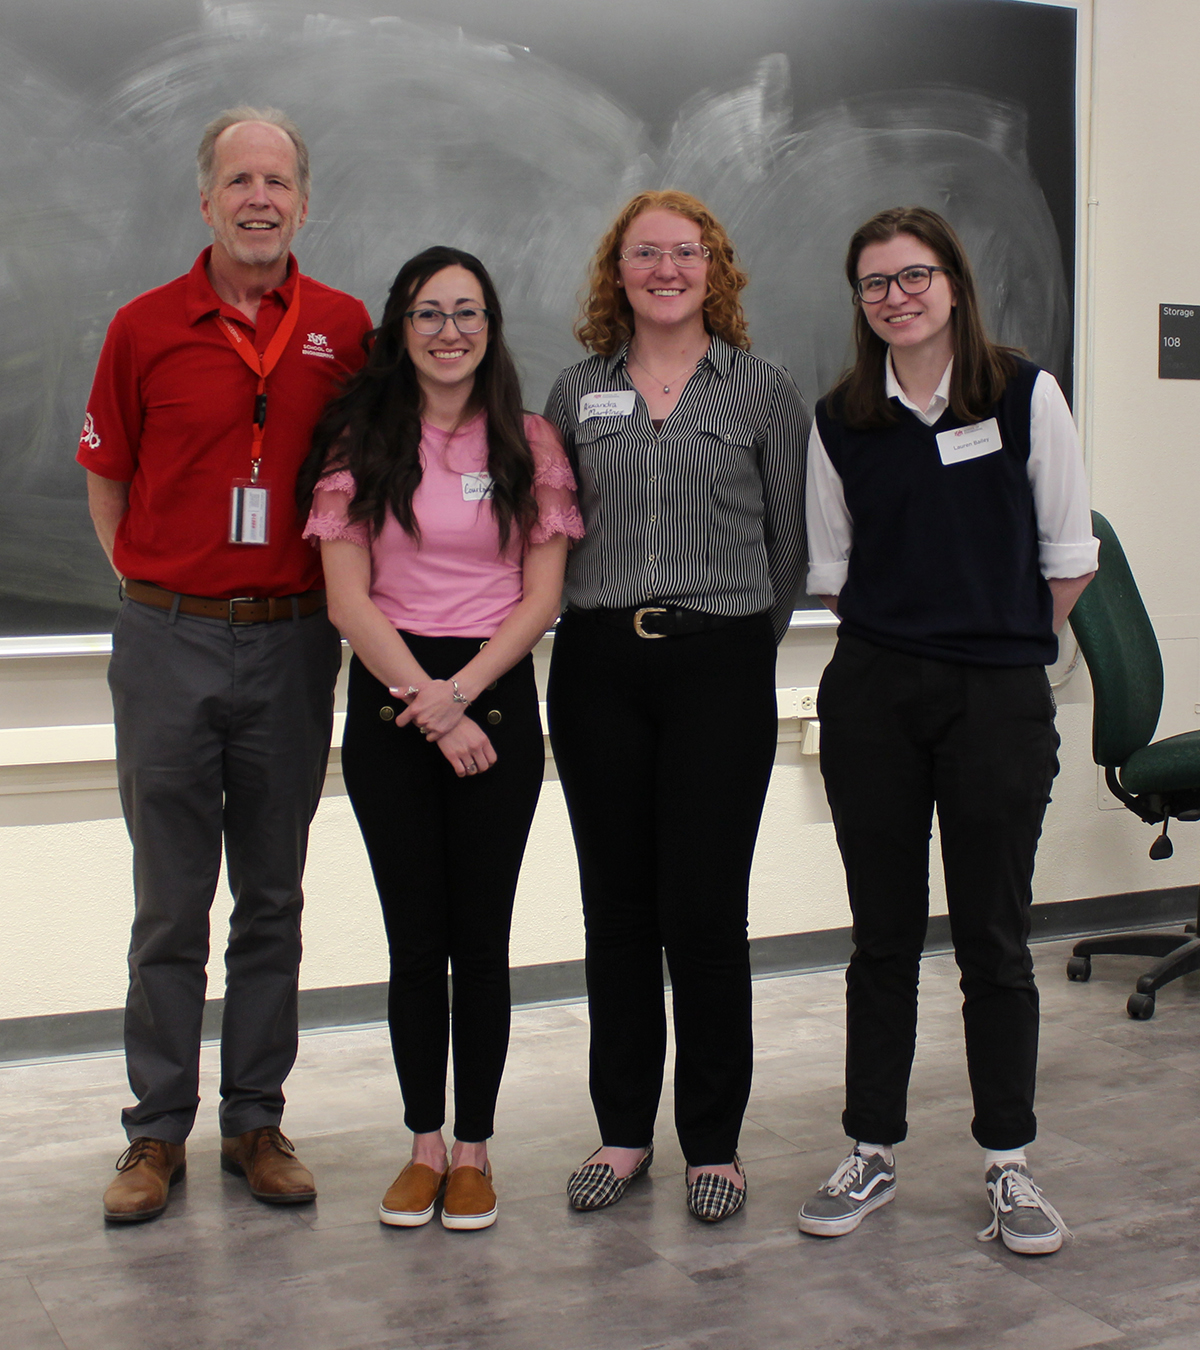 photo: Pitch winners from the Department of Nuclear Engineering pose with Senior Associate Dean of Academics and Community Engagement Charles Fleddermann.